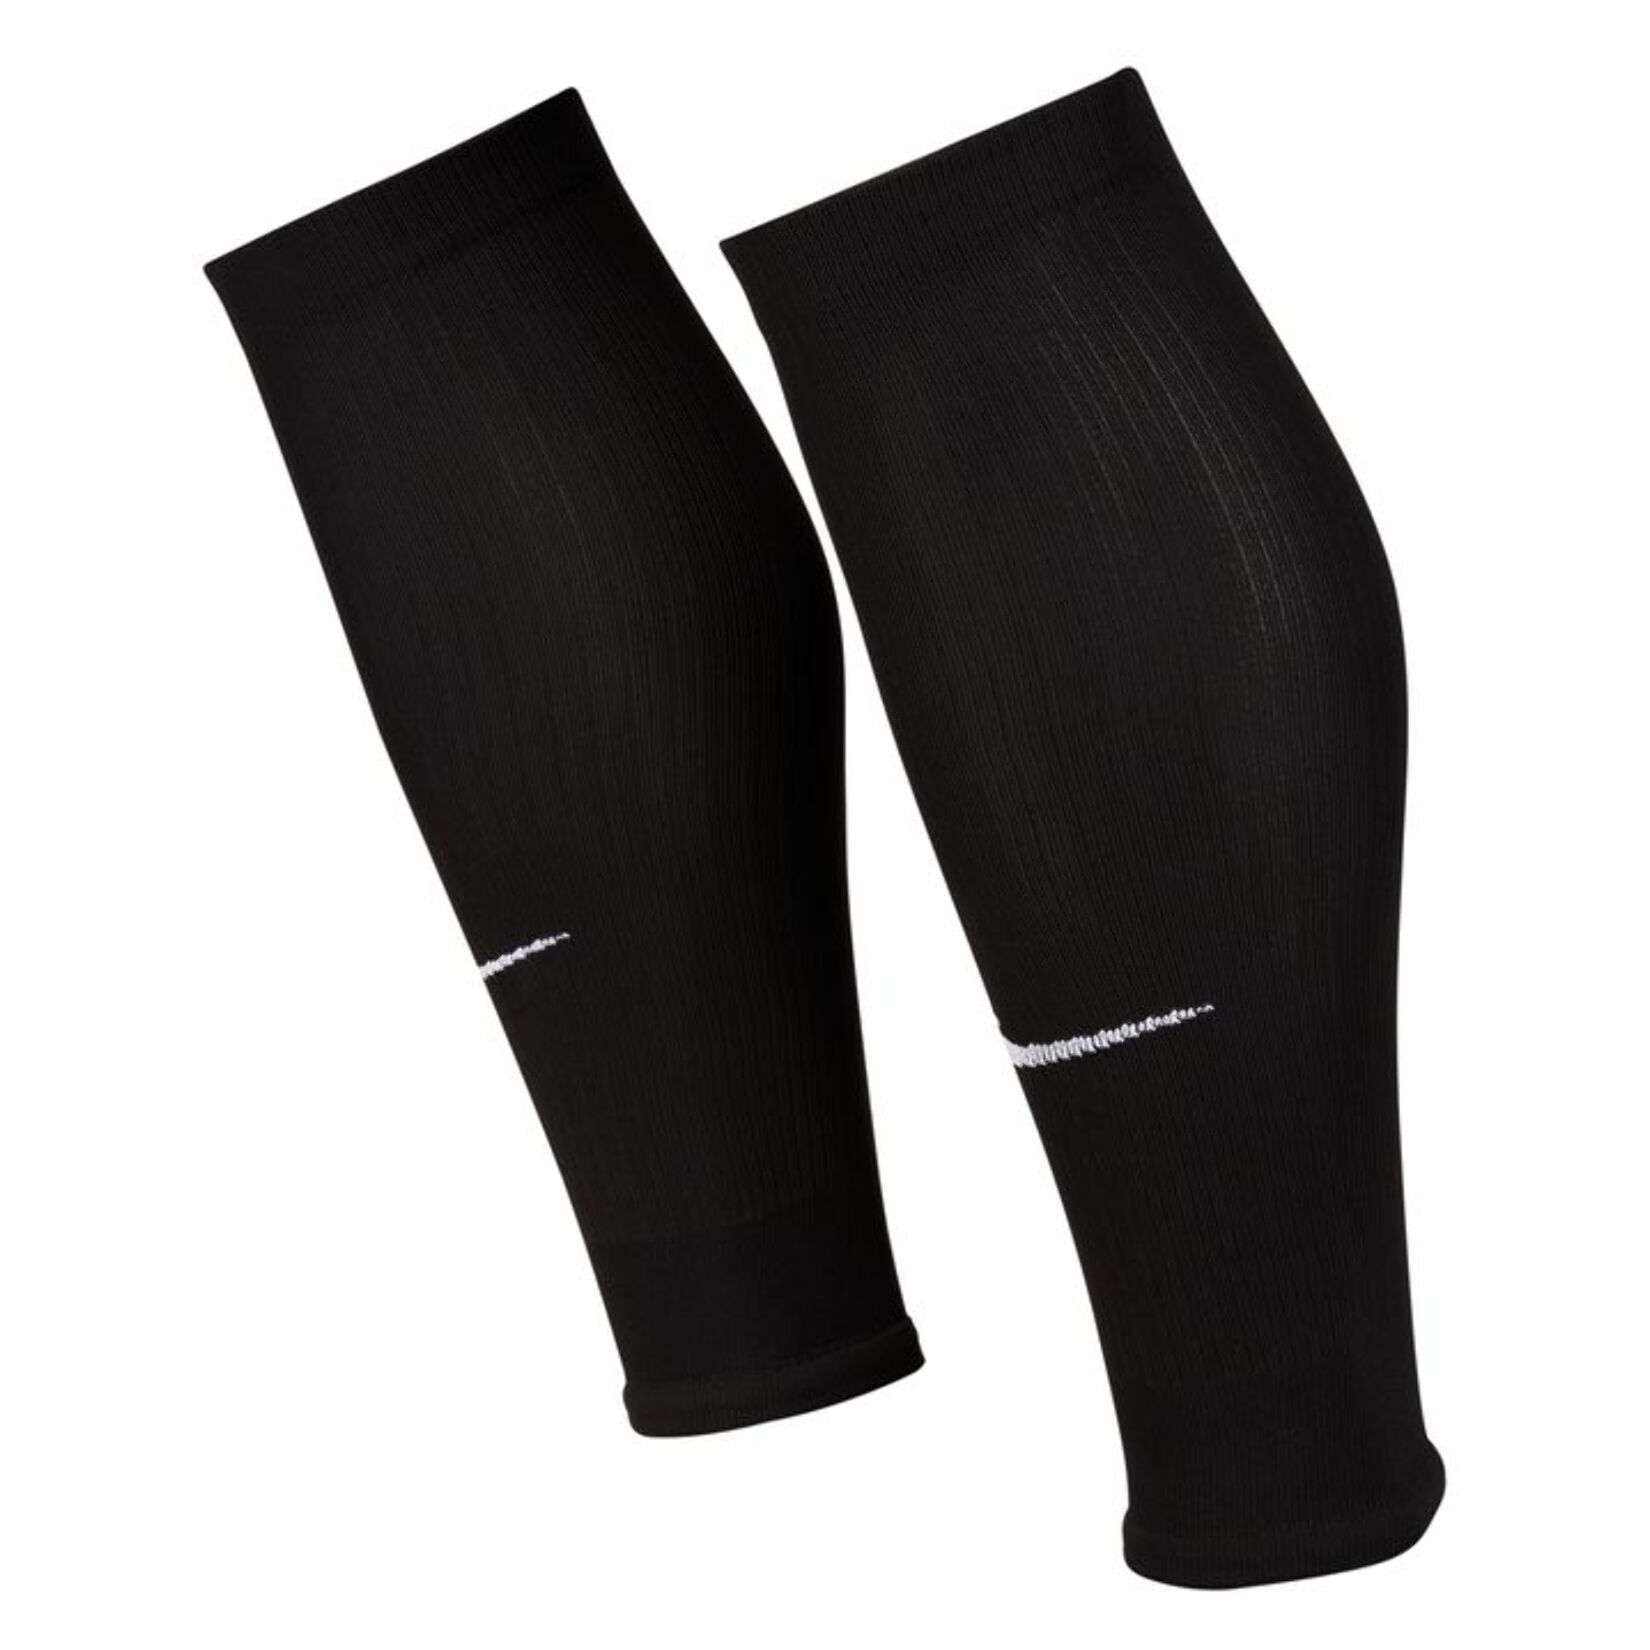 Nike Zoned Support Calf Sleeves Running - Compression - Black